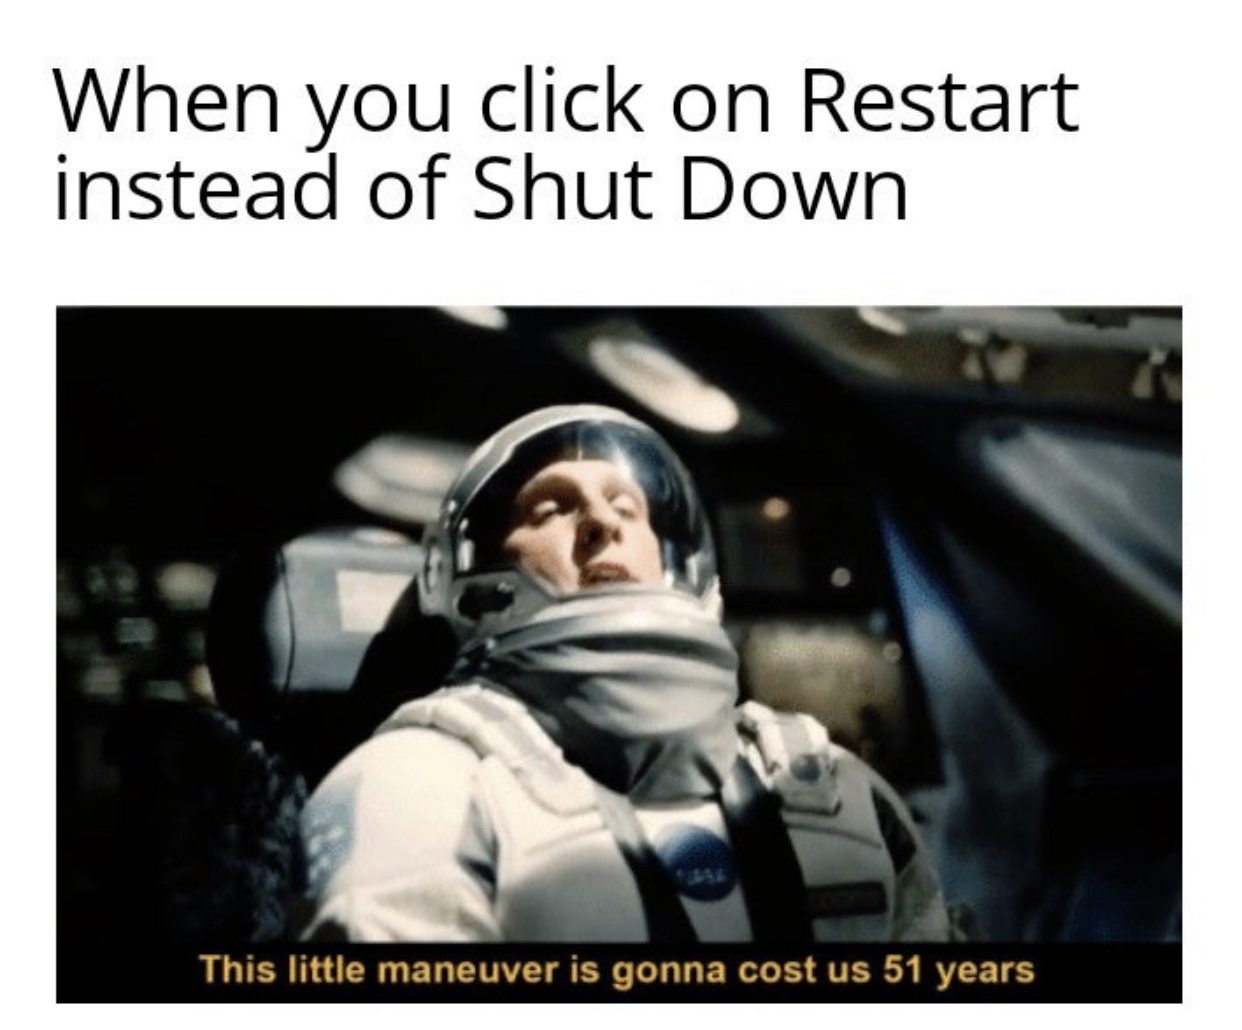 little maneuver is gonna cost us 51 years - When you click on Restart instead of Shut Down This little maneuver is gonna cost us 51 years